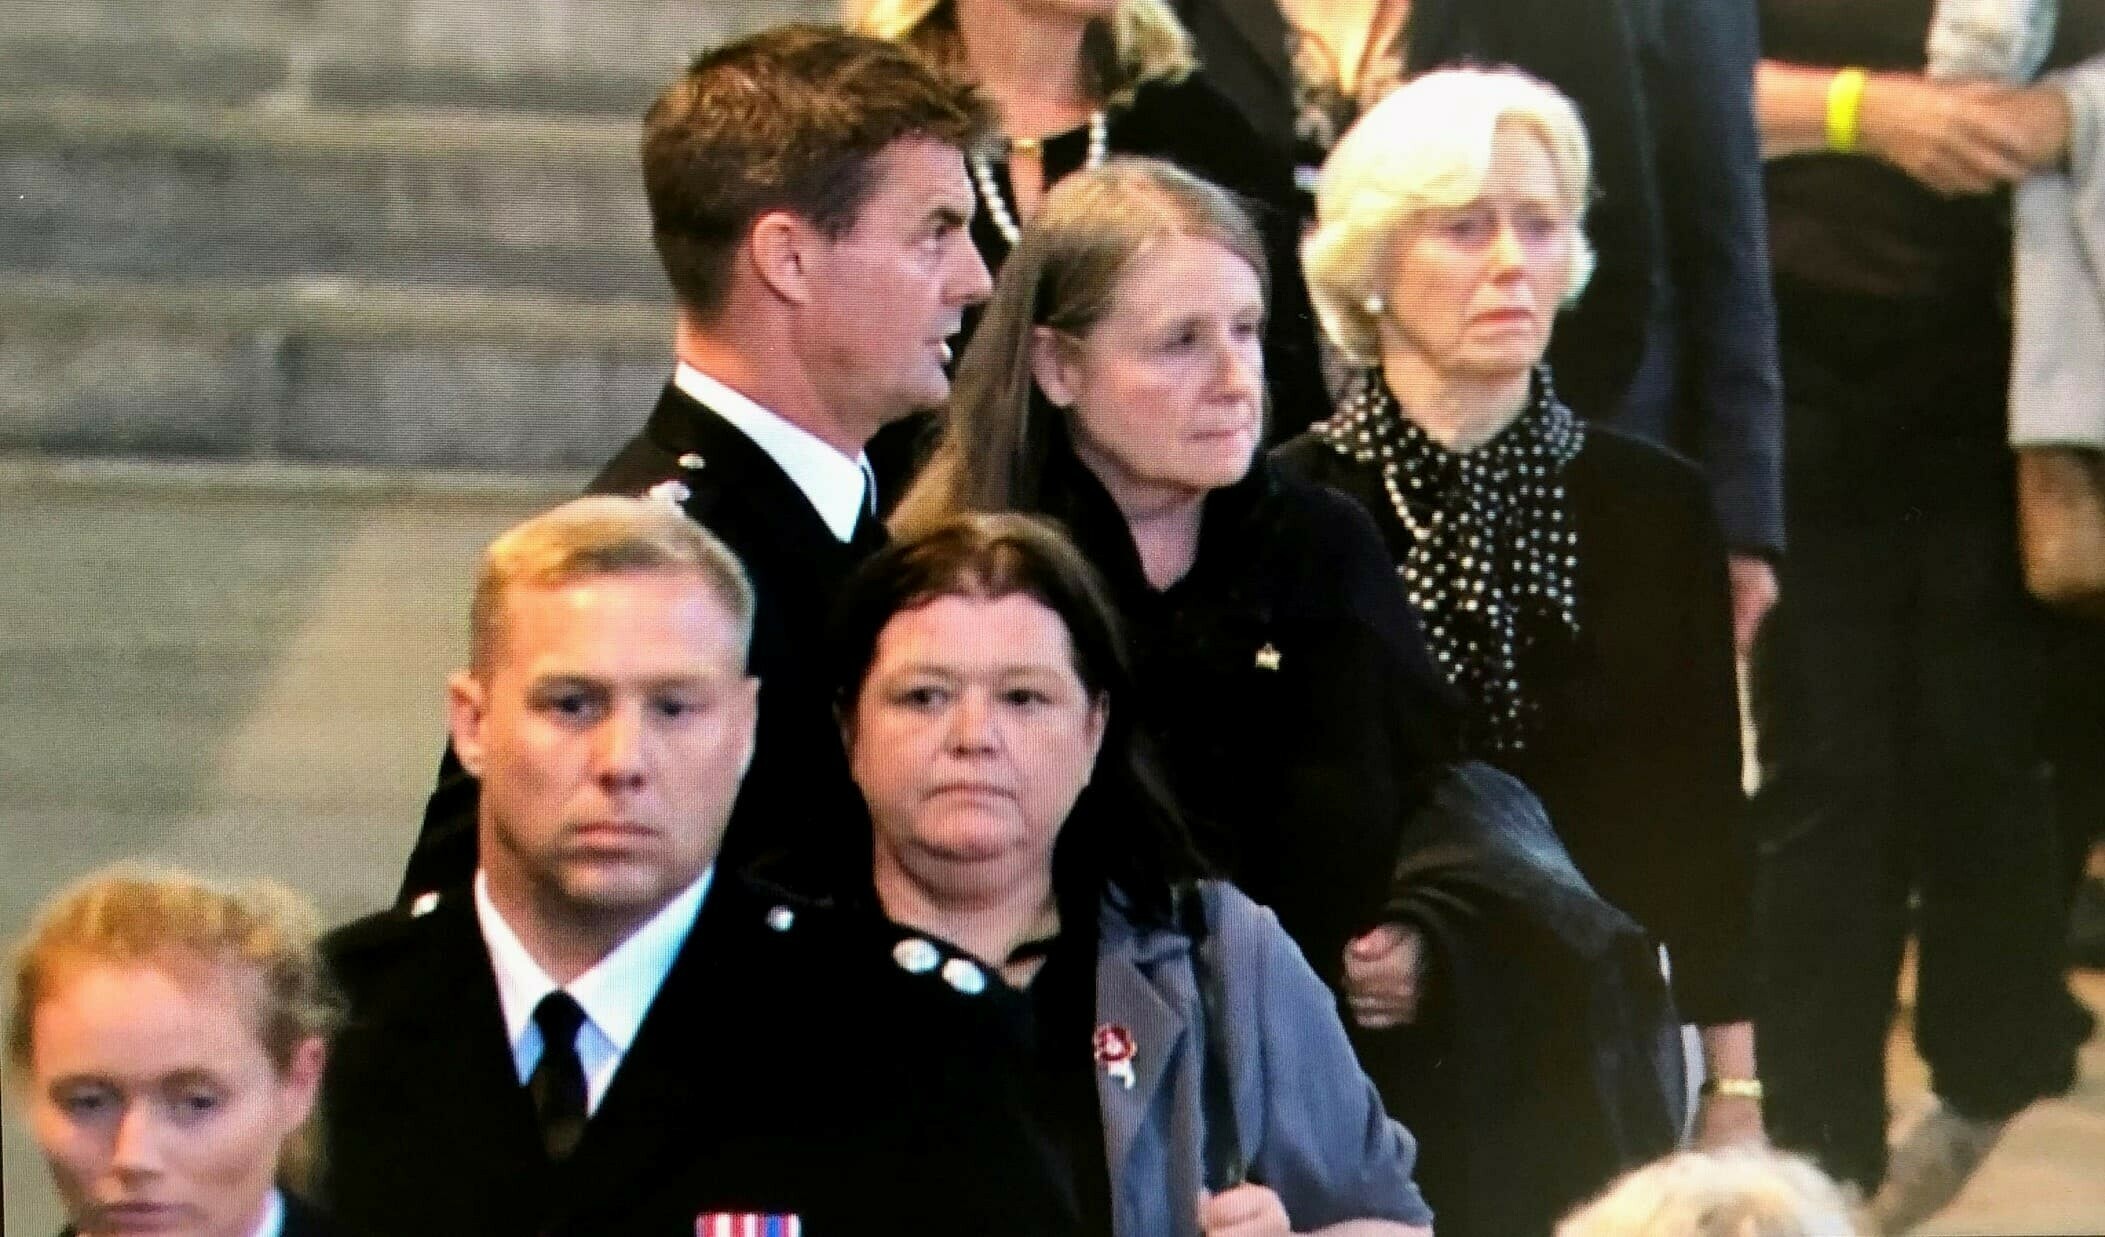 Members of our staff pay their respects in Westminster Hall